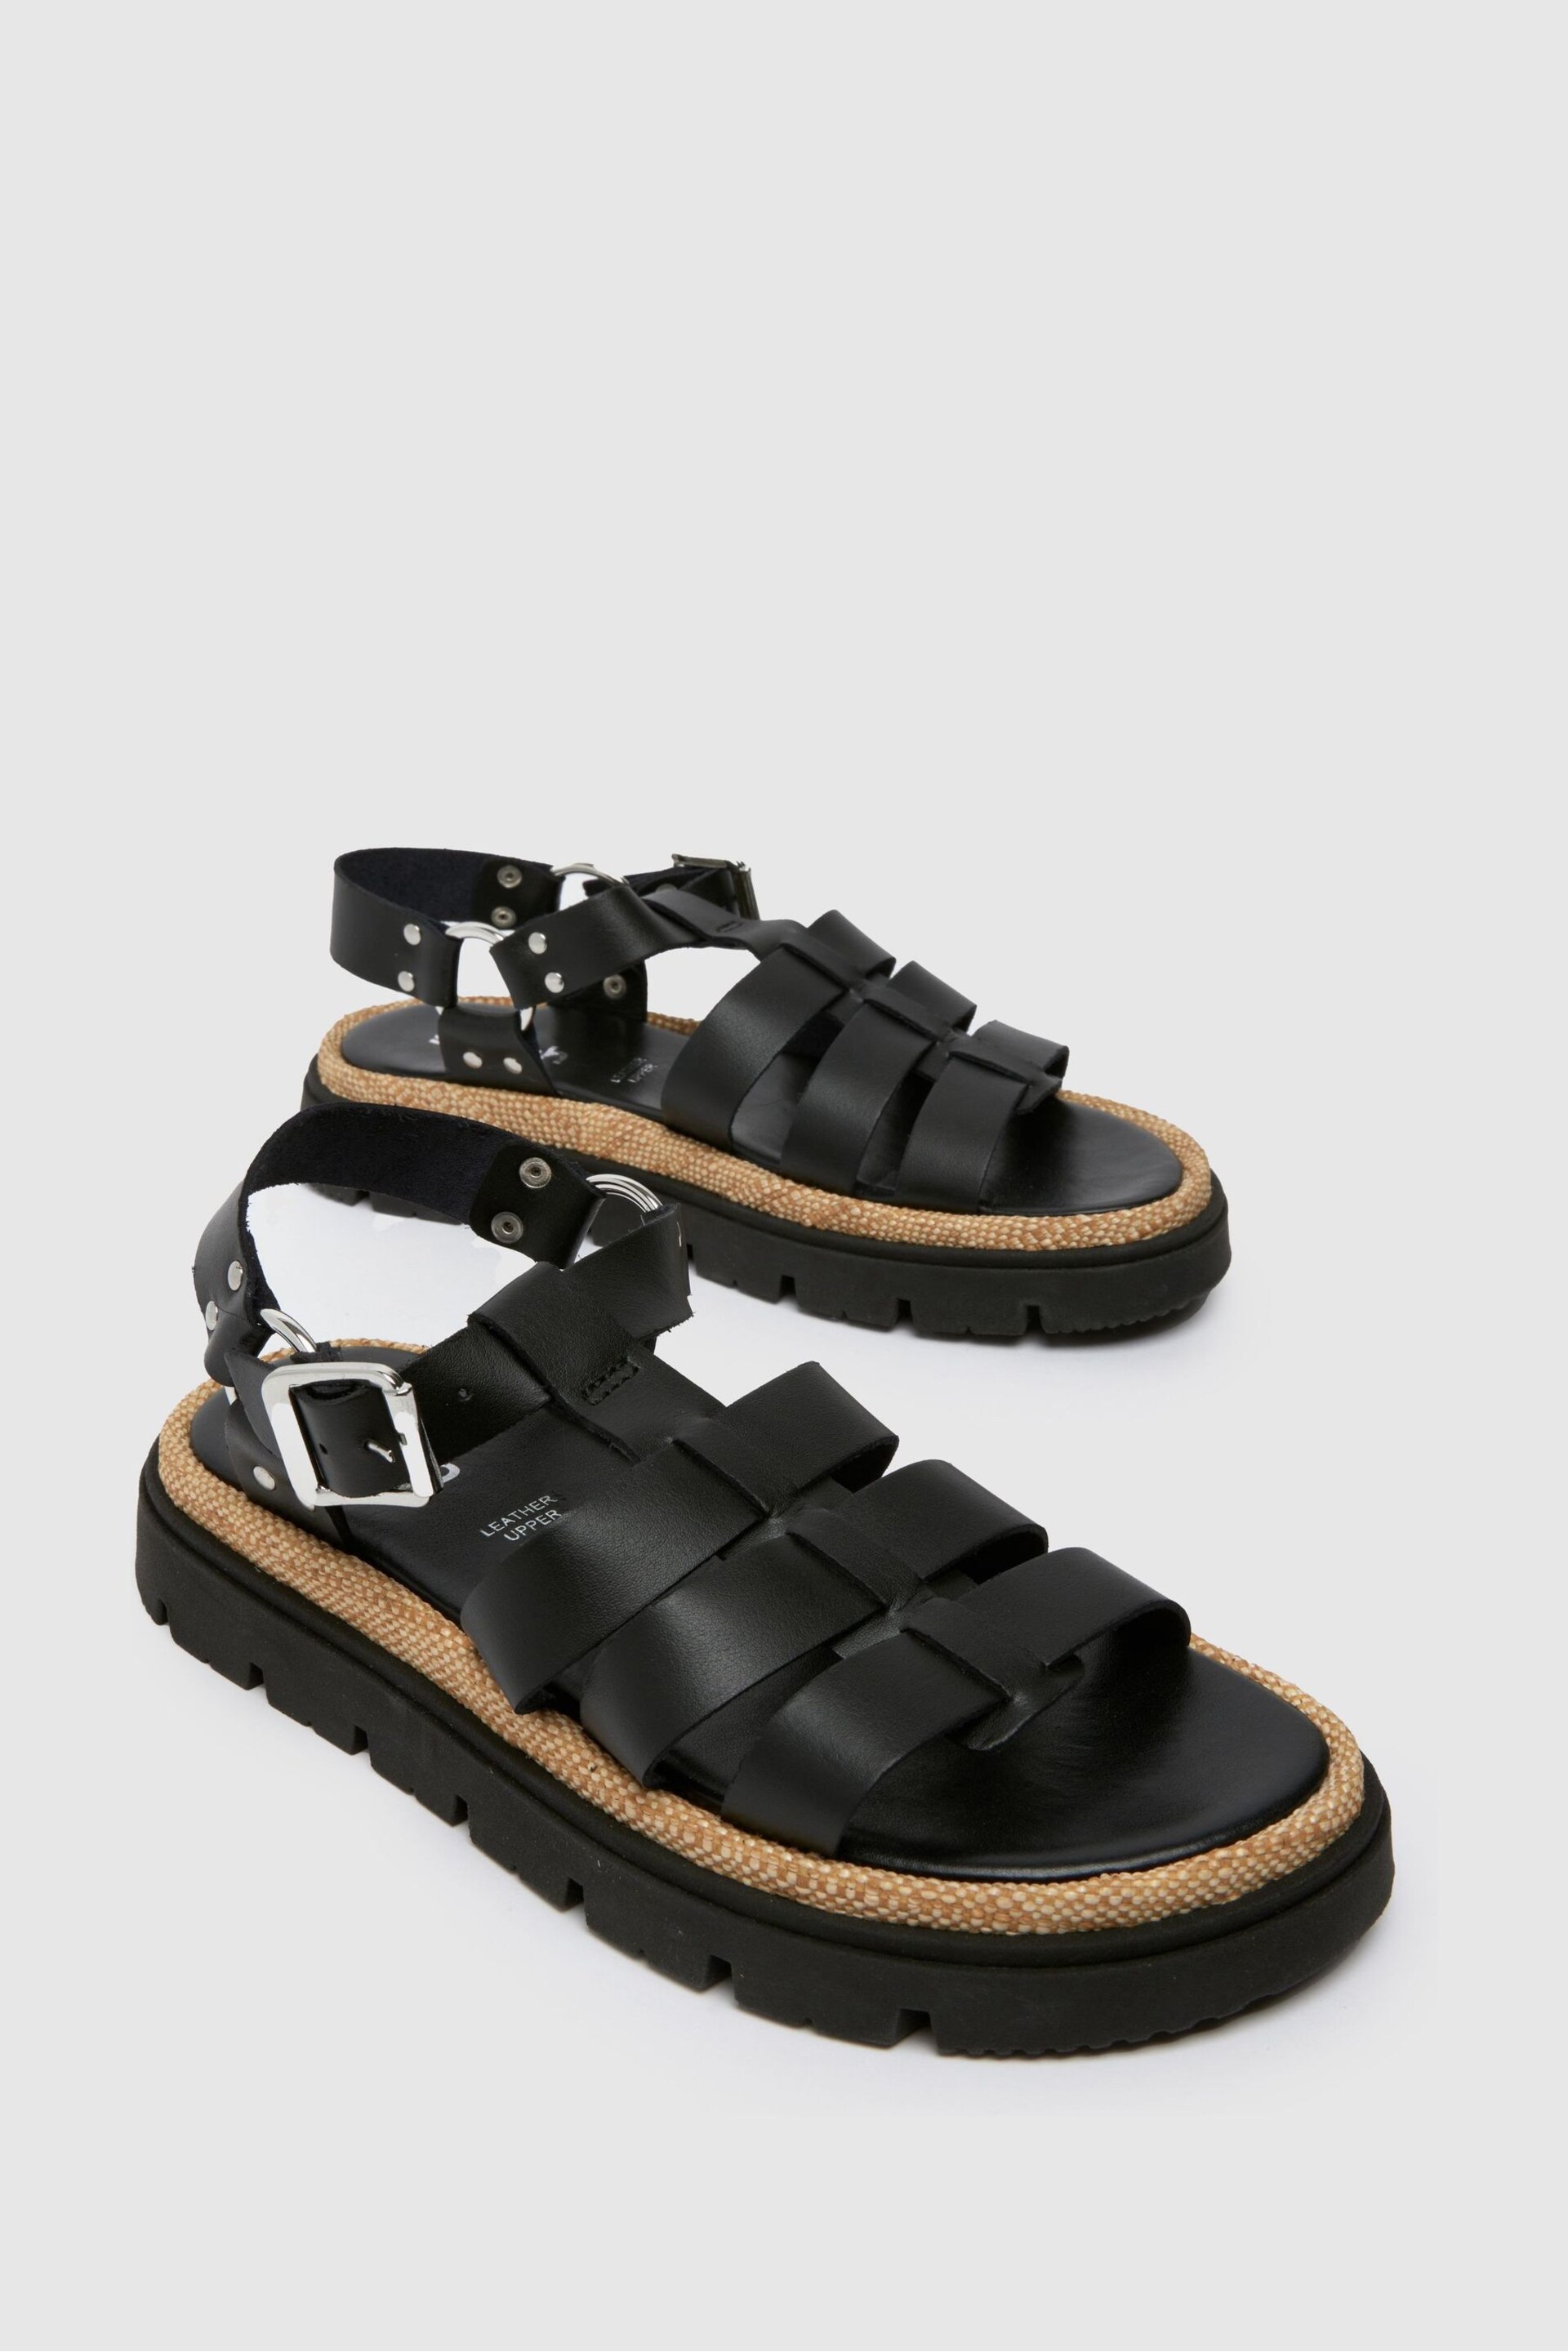 Schuh Texas Leather Gladiator Black Sandals - Image 3 of 4